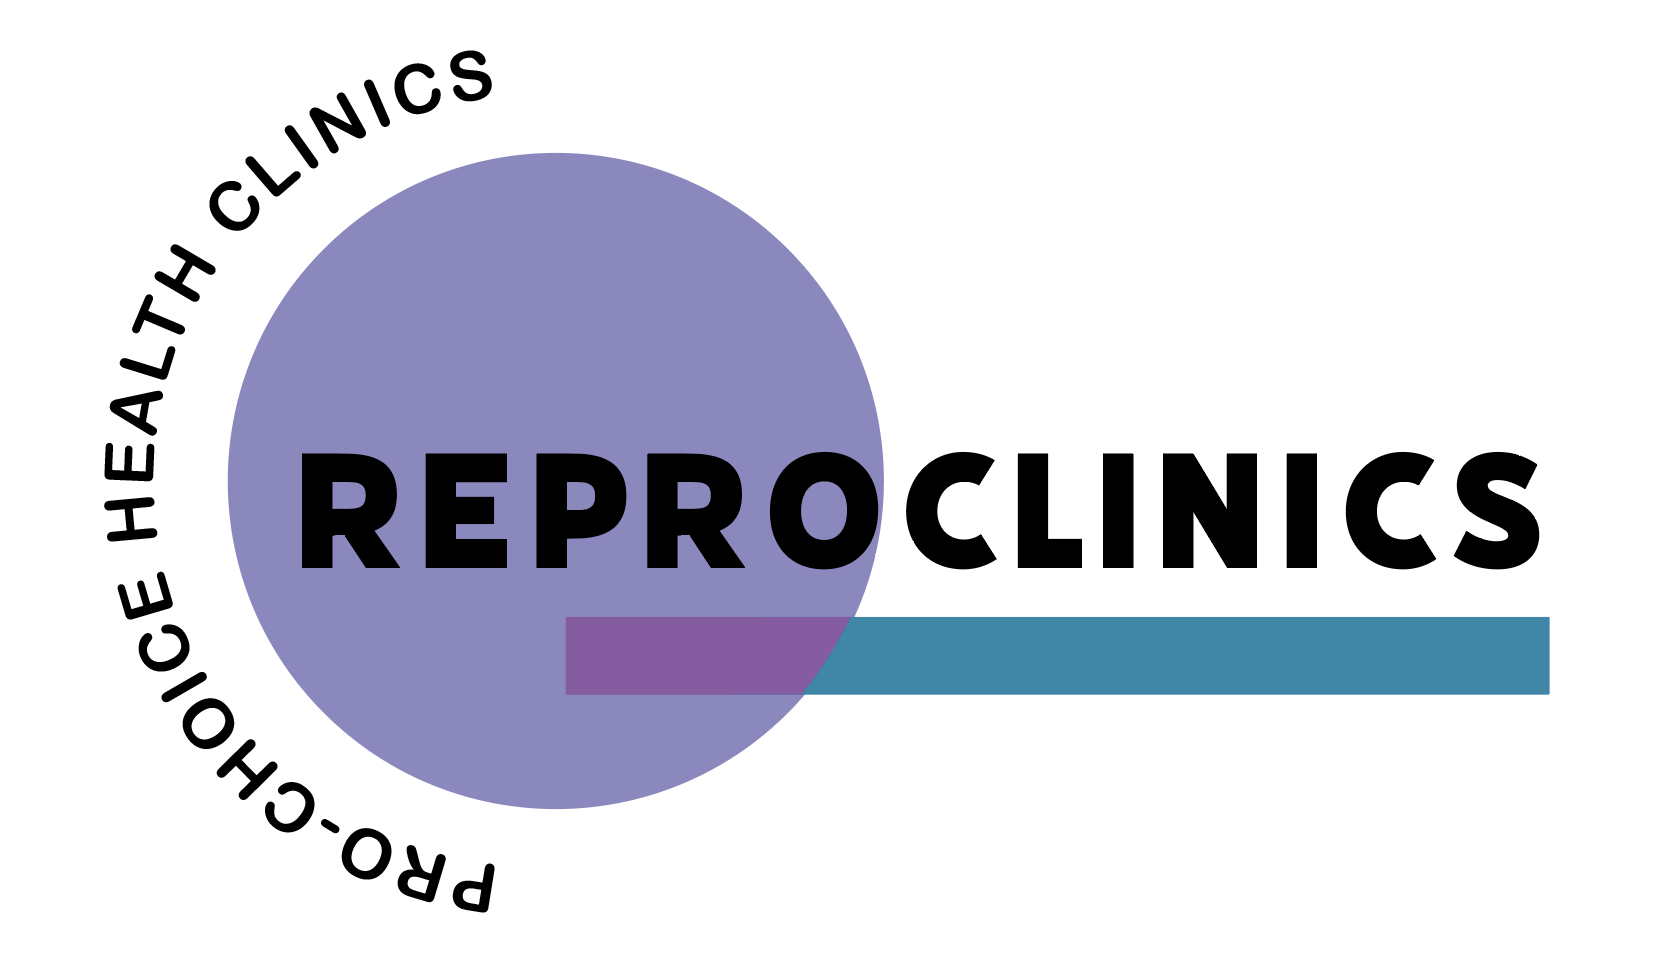 Pro-Choice Health Clinics offering non-judgemental reproductive care.